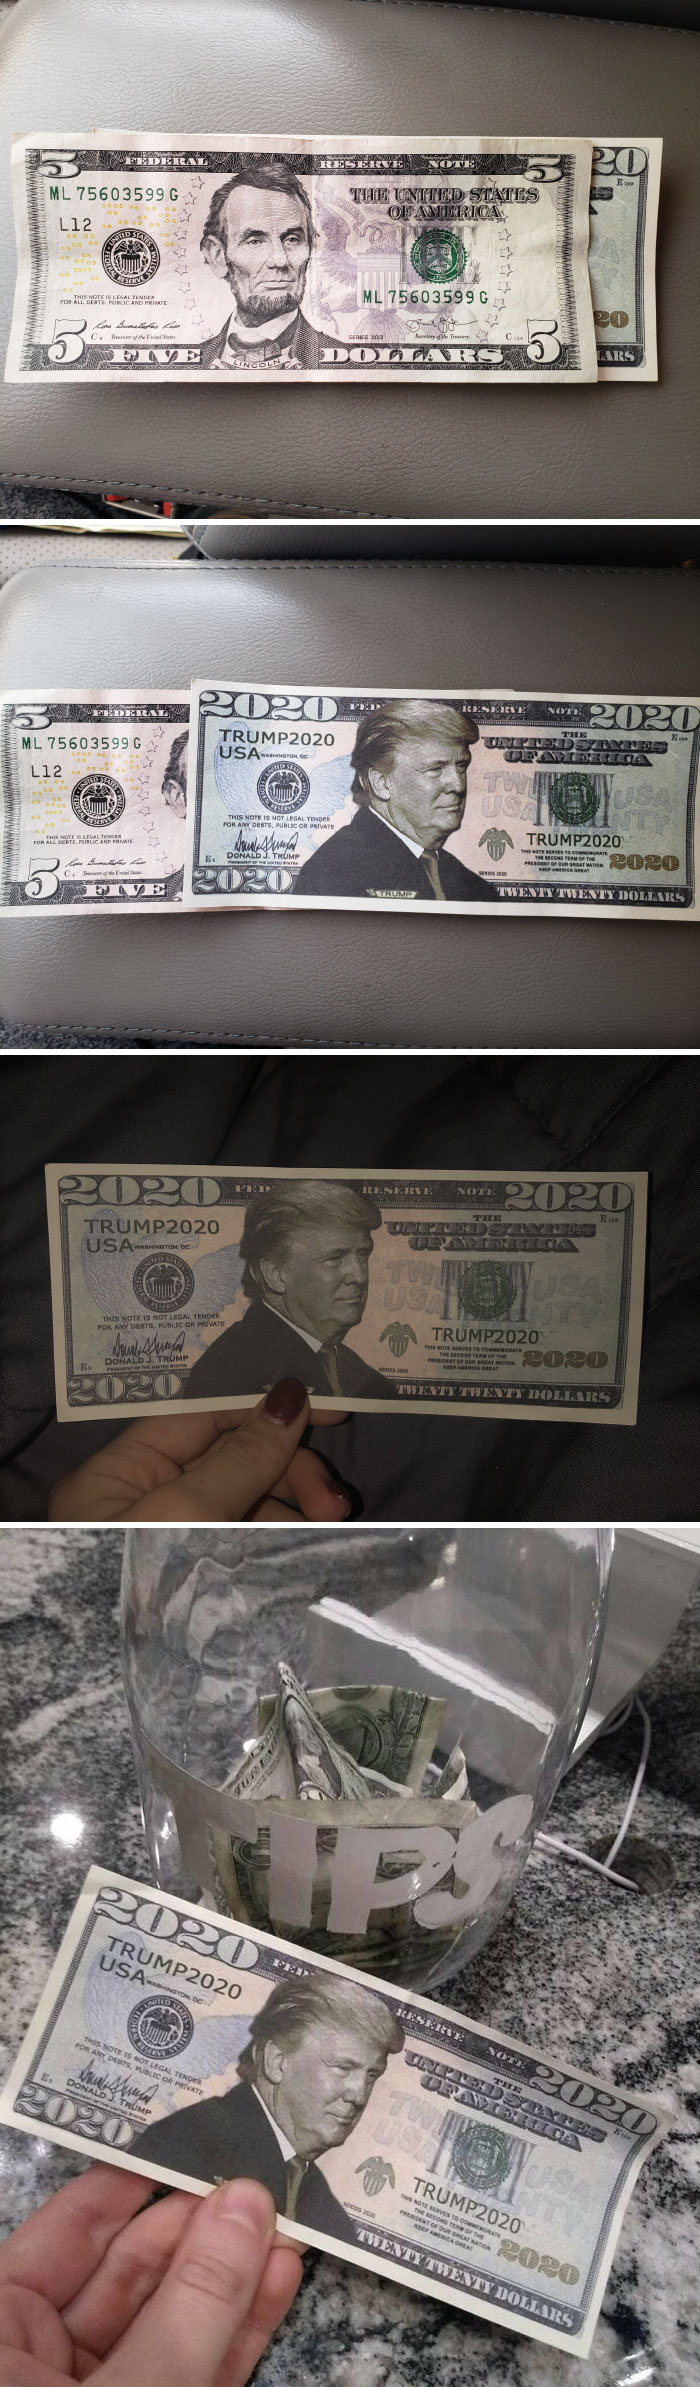 Here's A Tip, It's Trashy As Hell To Leave Fake Money As A Tip That Advertises Your Candidate